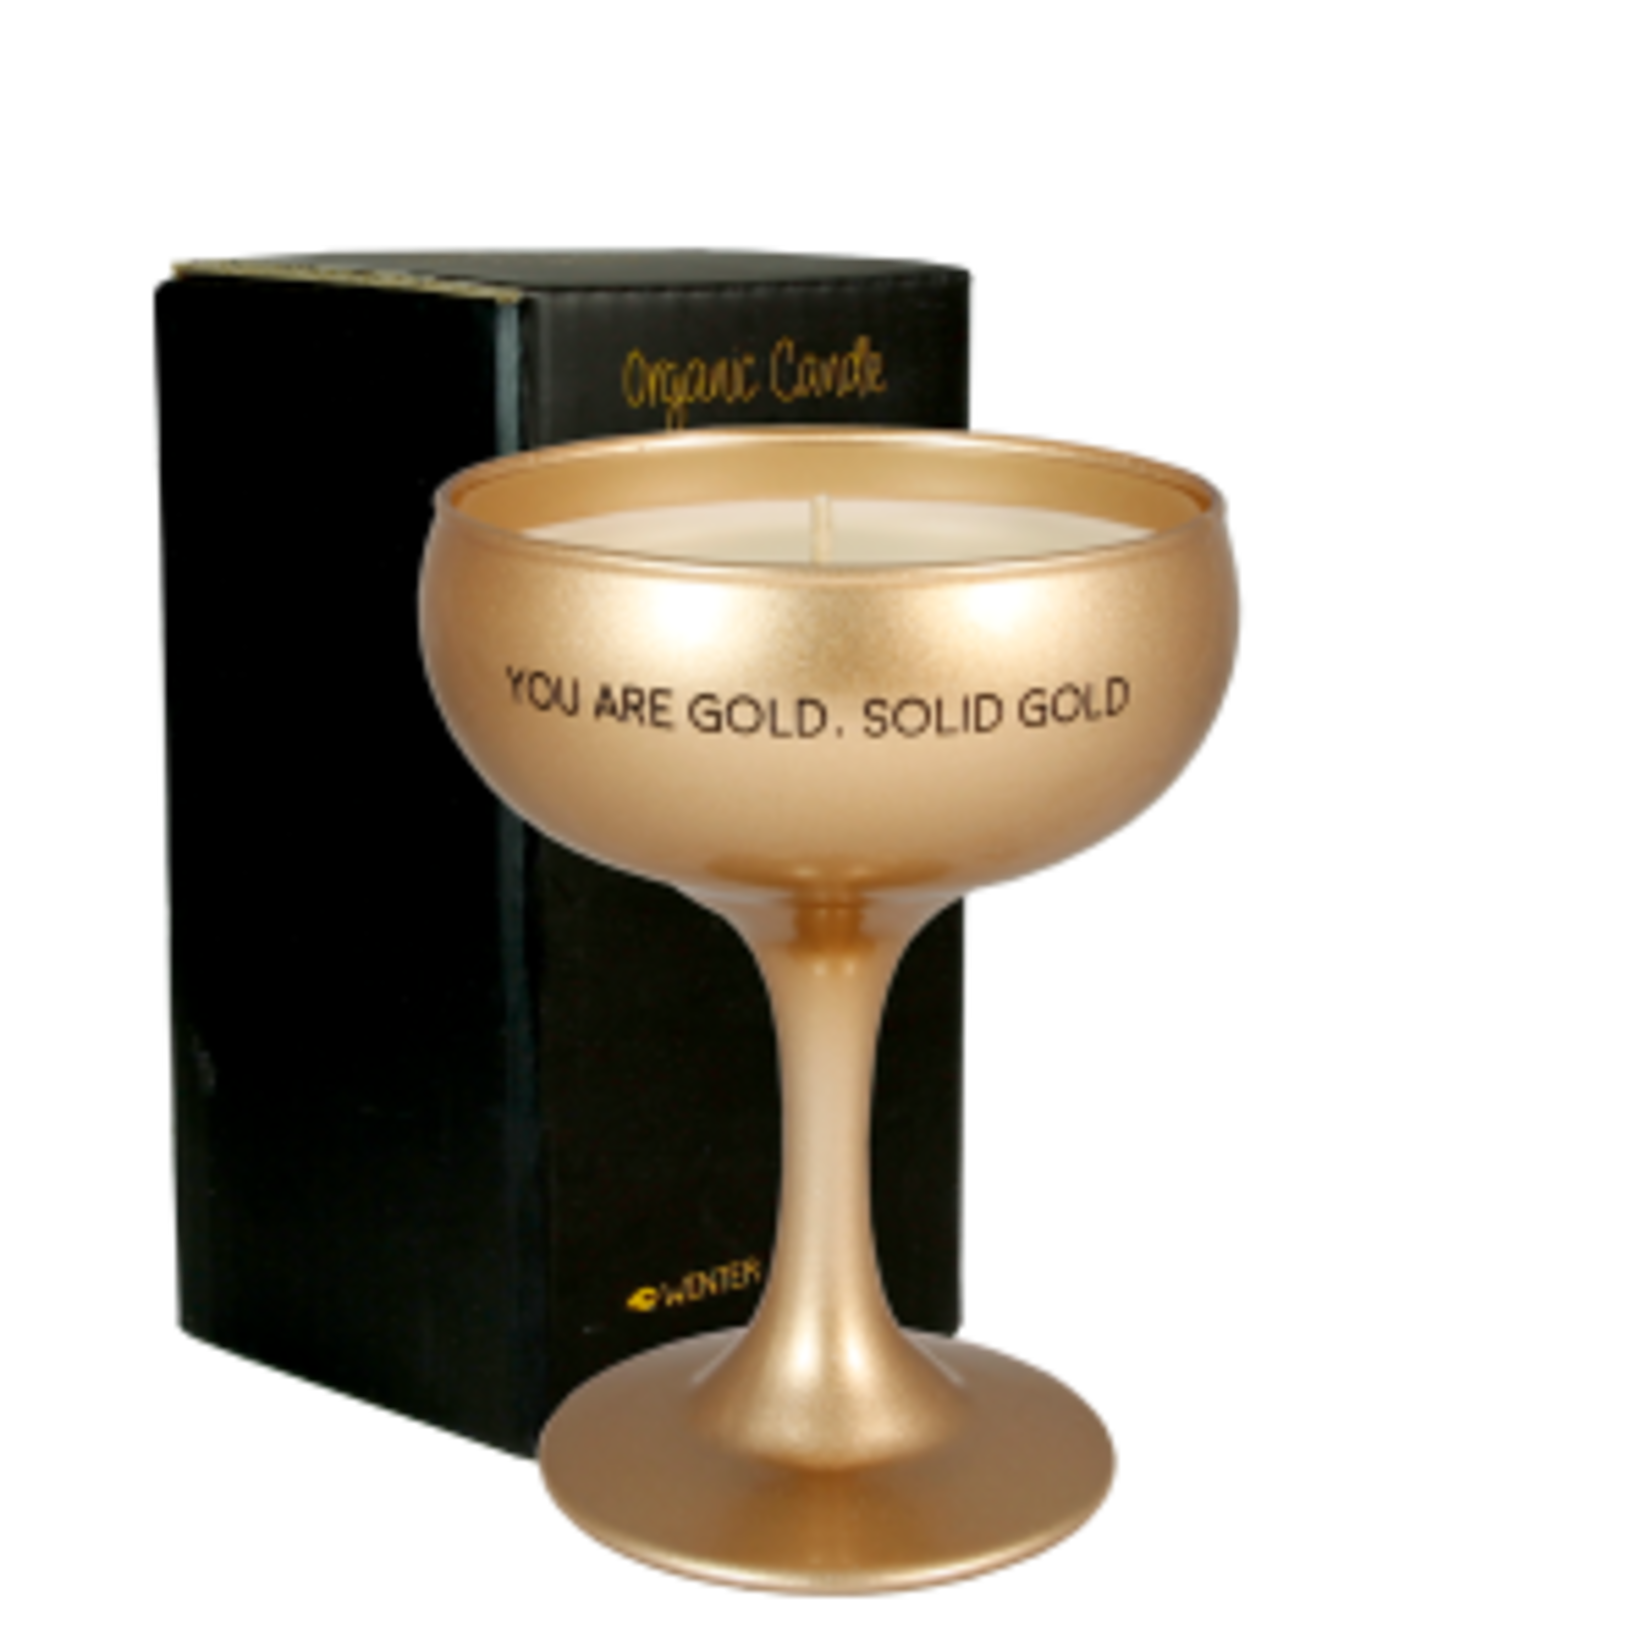 My Flame Sojakaars in champagneglas - You are gold, solid gold - Silky Tonka